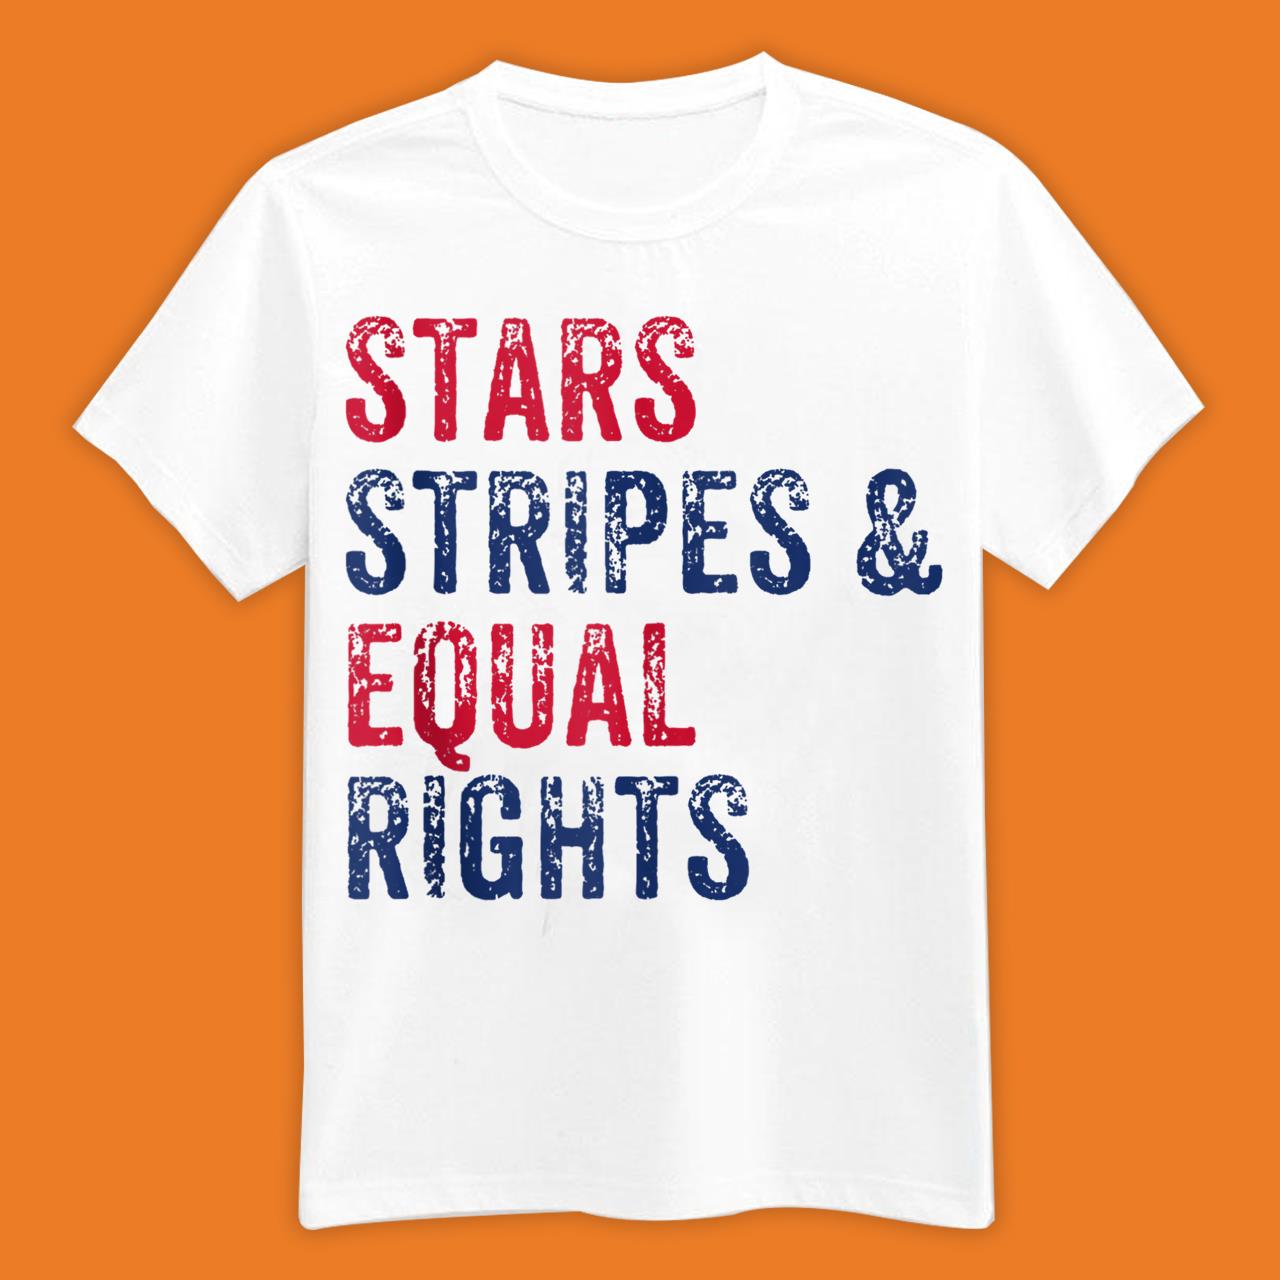 Stars Stripes and Equal Rights 4th Of July Women’s Rights Shirts